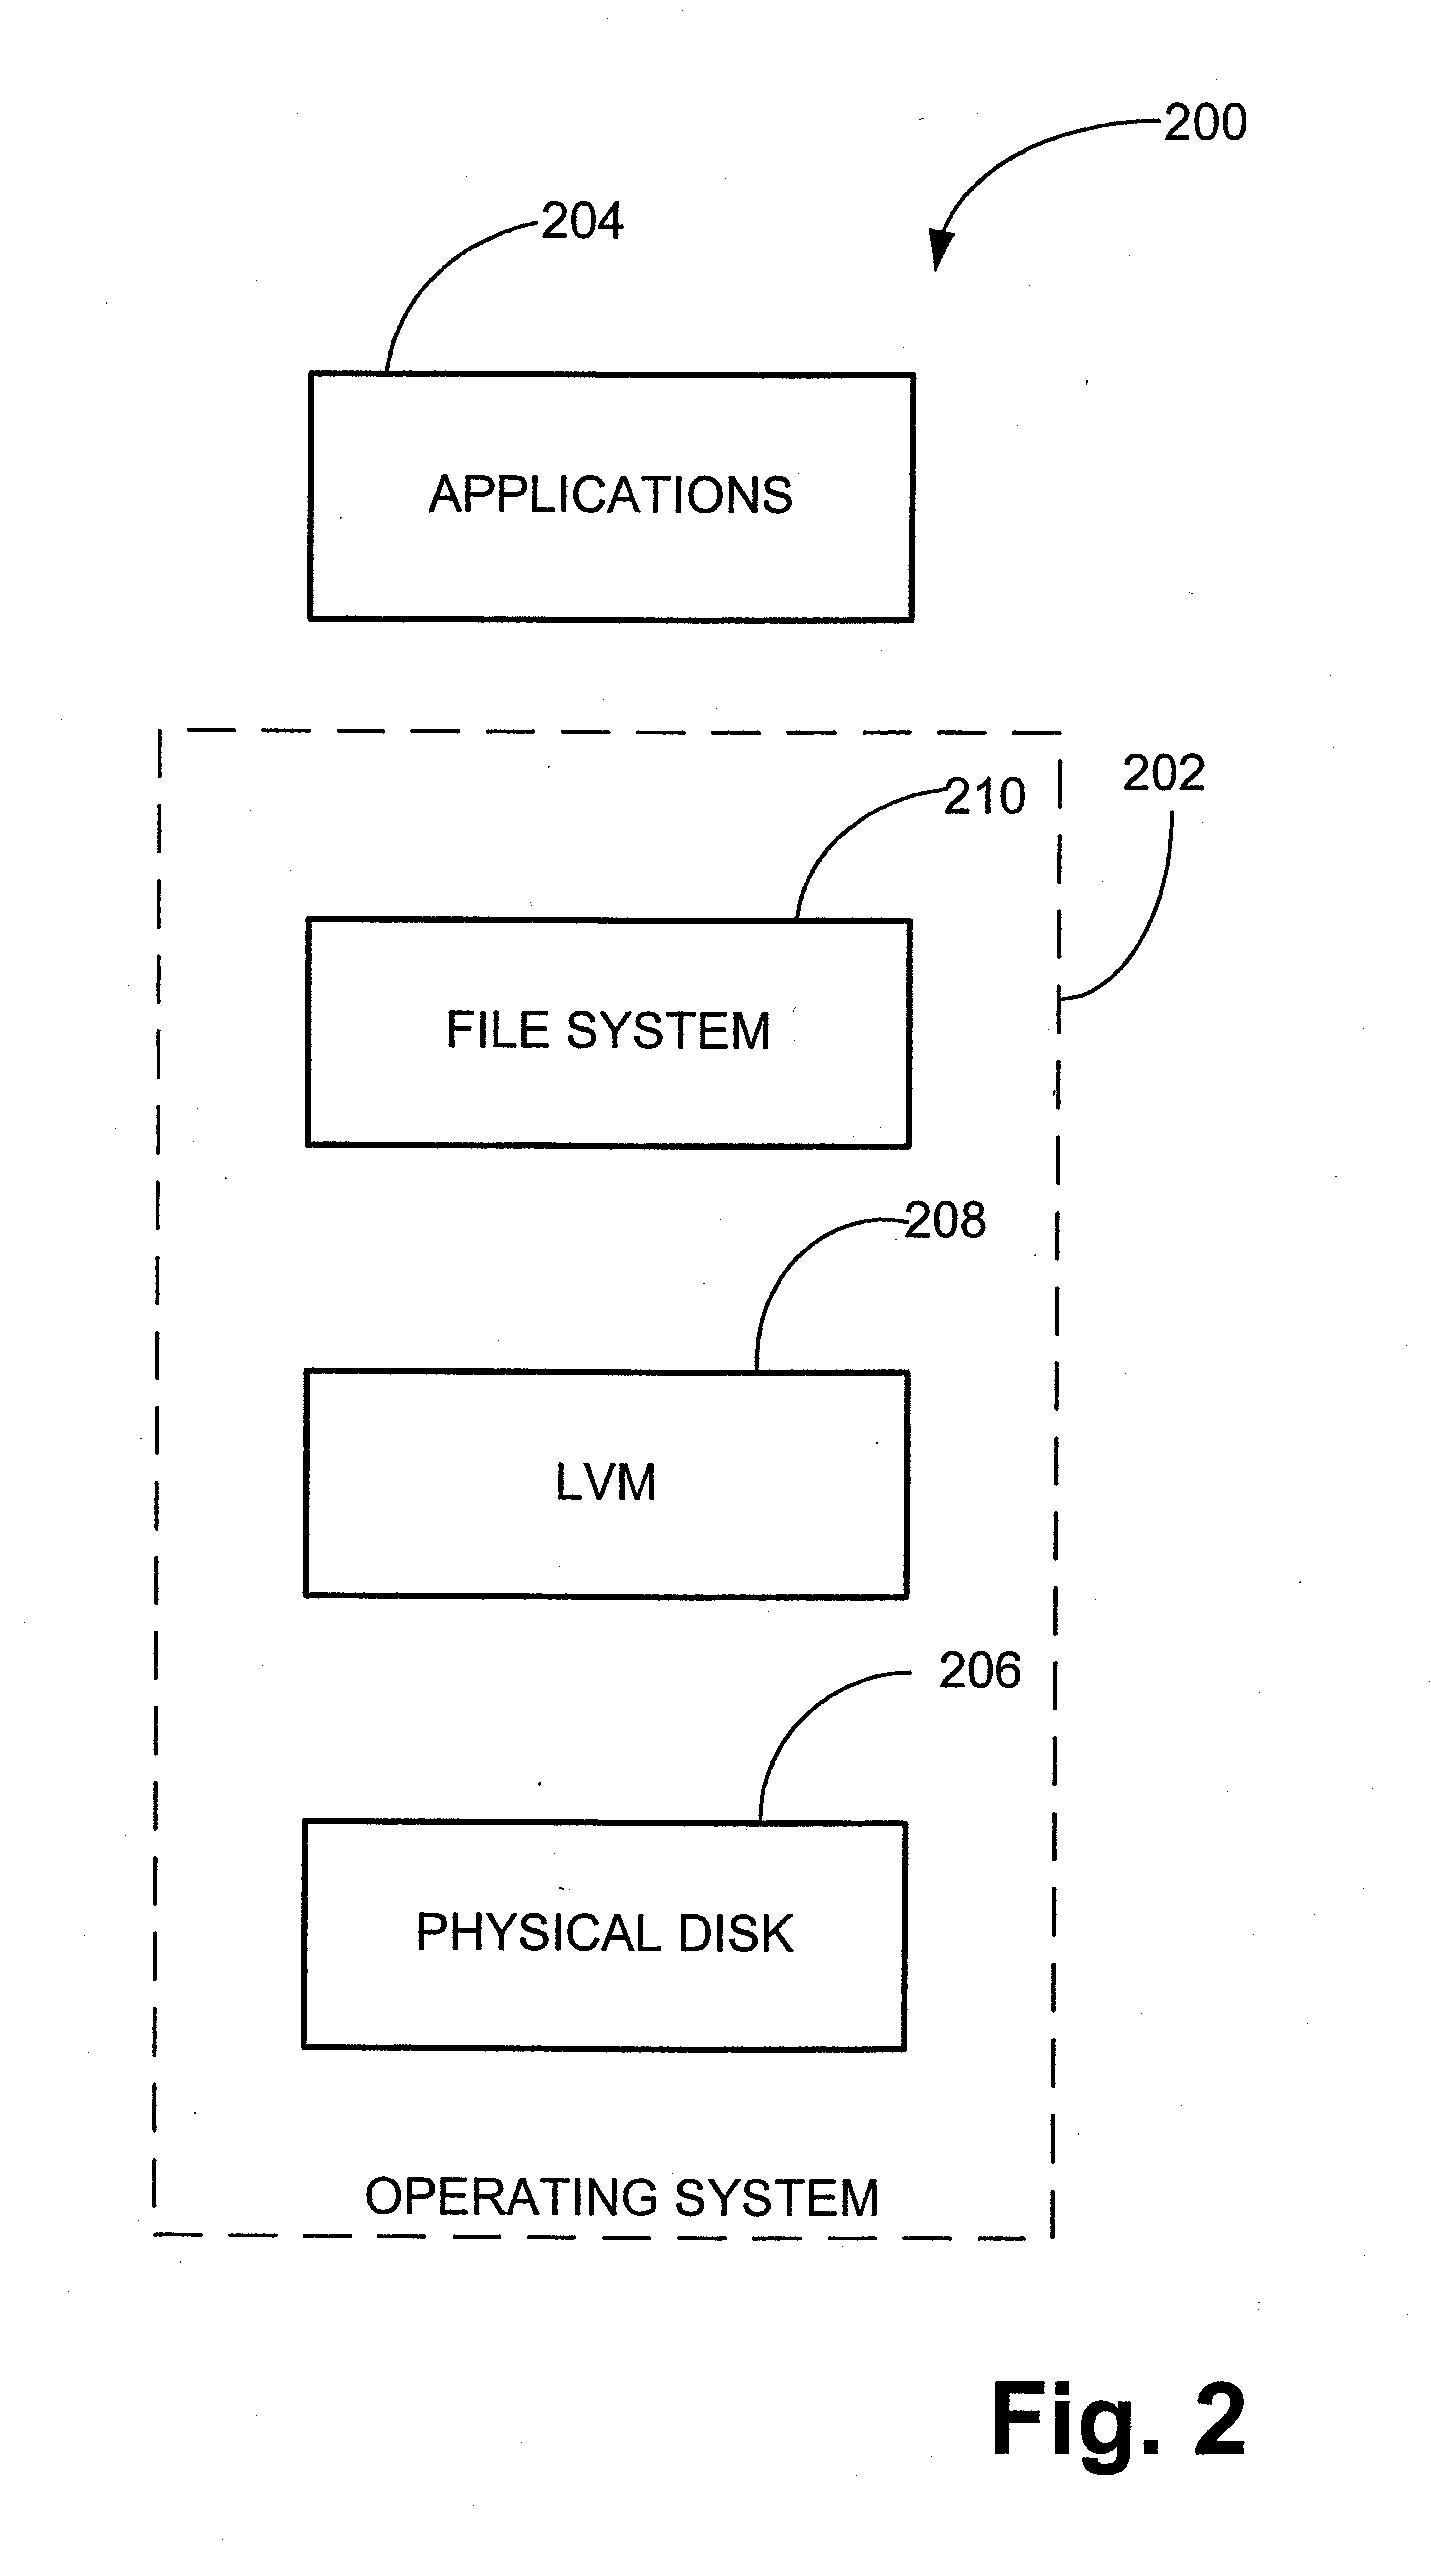 System and method for generating and managing quick recovery volumes